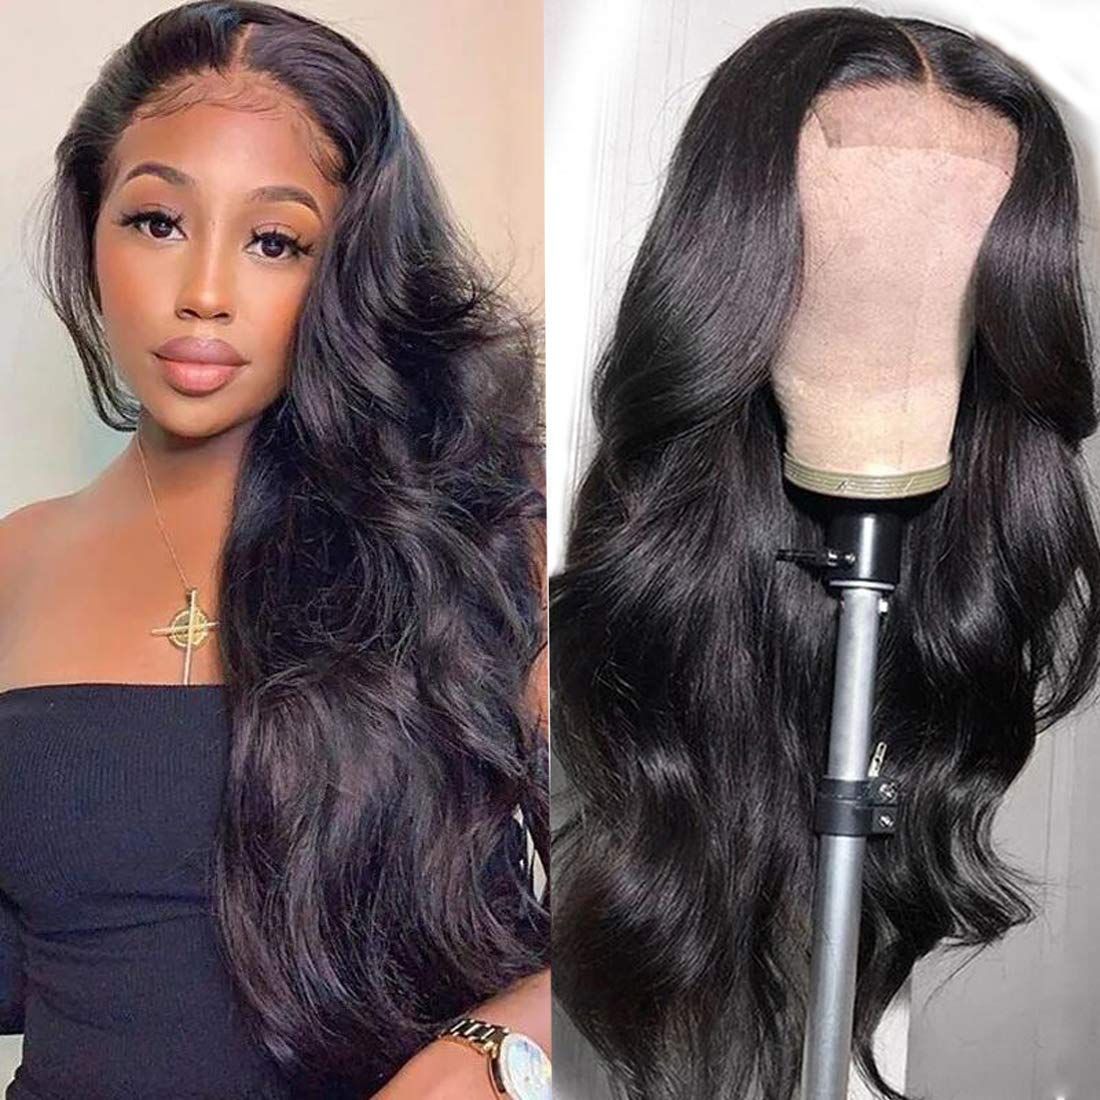 18 Best Wigs on Amazon, According to Customer Reviews